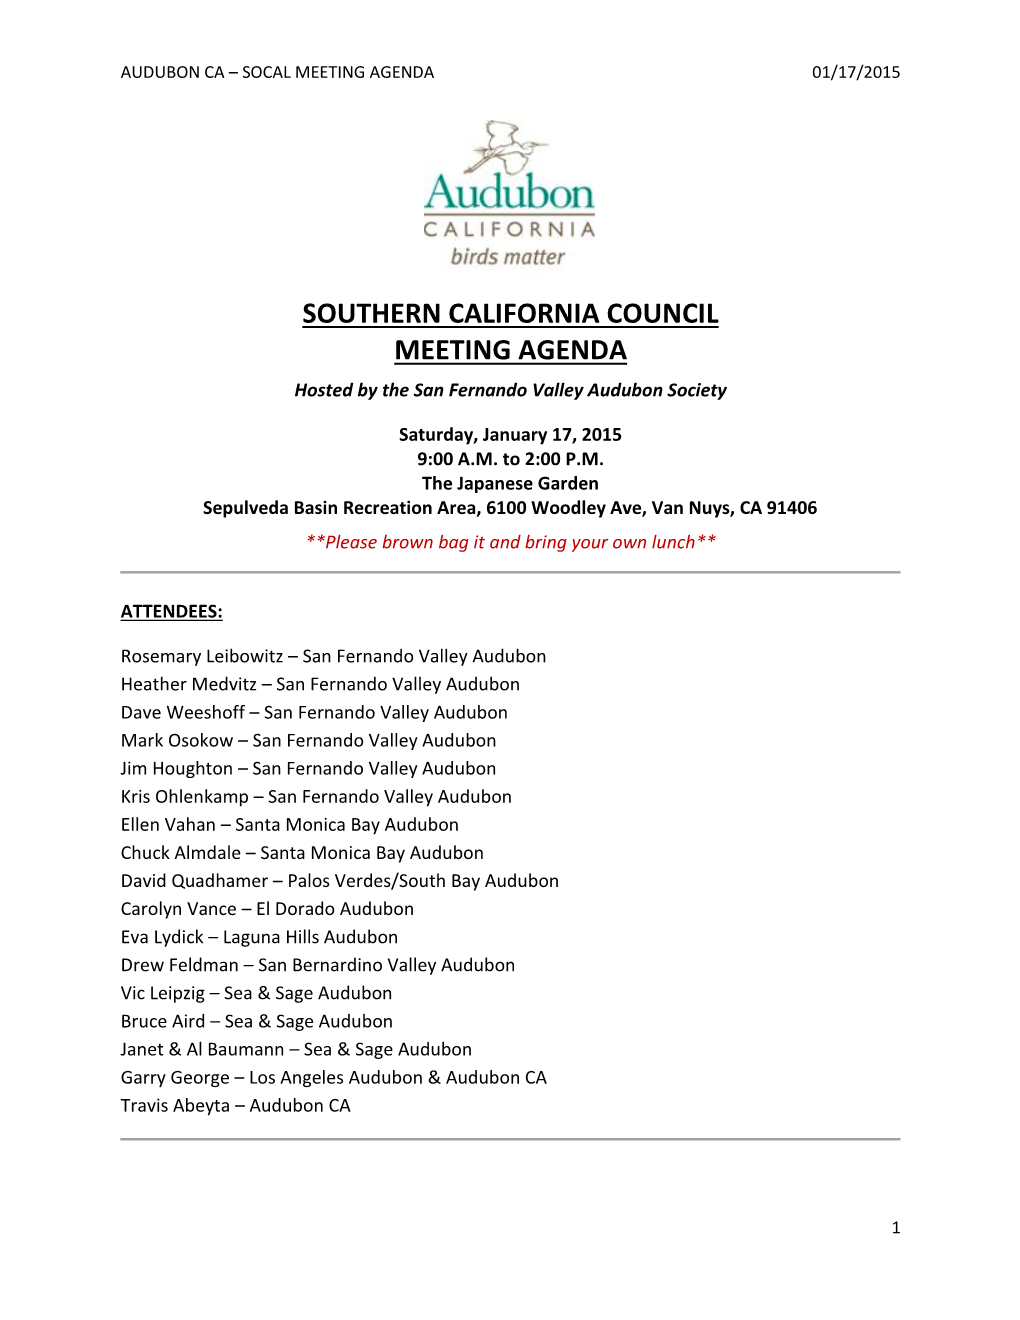 SOUTHERN CALIFORNIA COUNCIL MEETING AGENDA Hosted by the San Fernando Valley Audubon Society